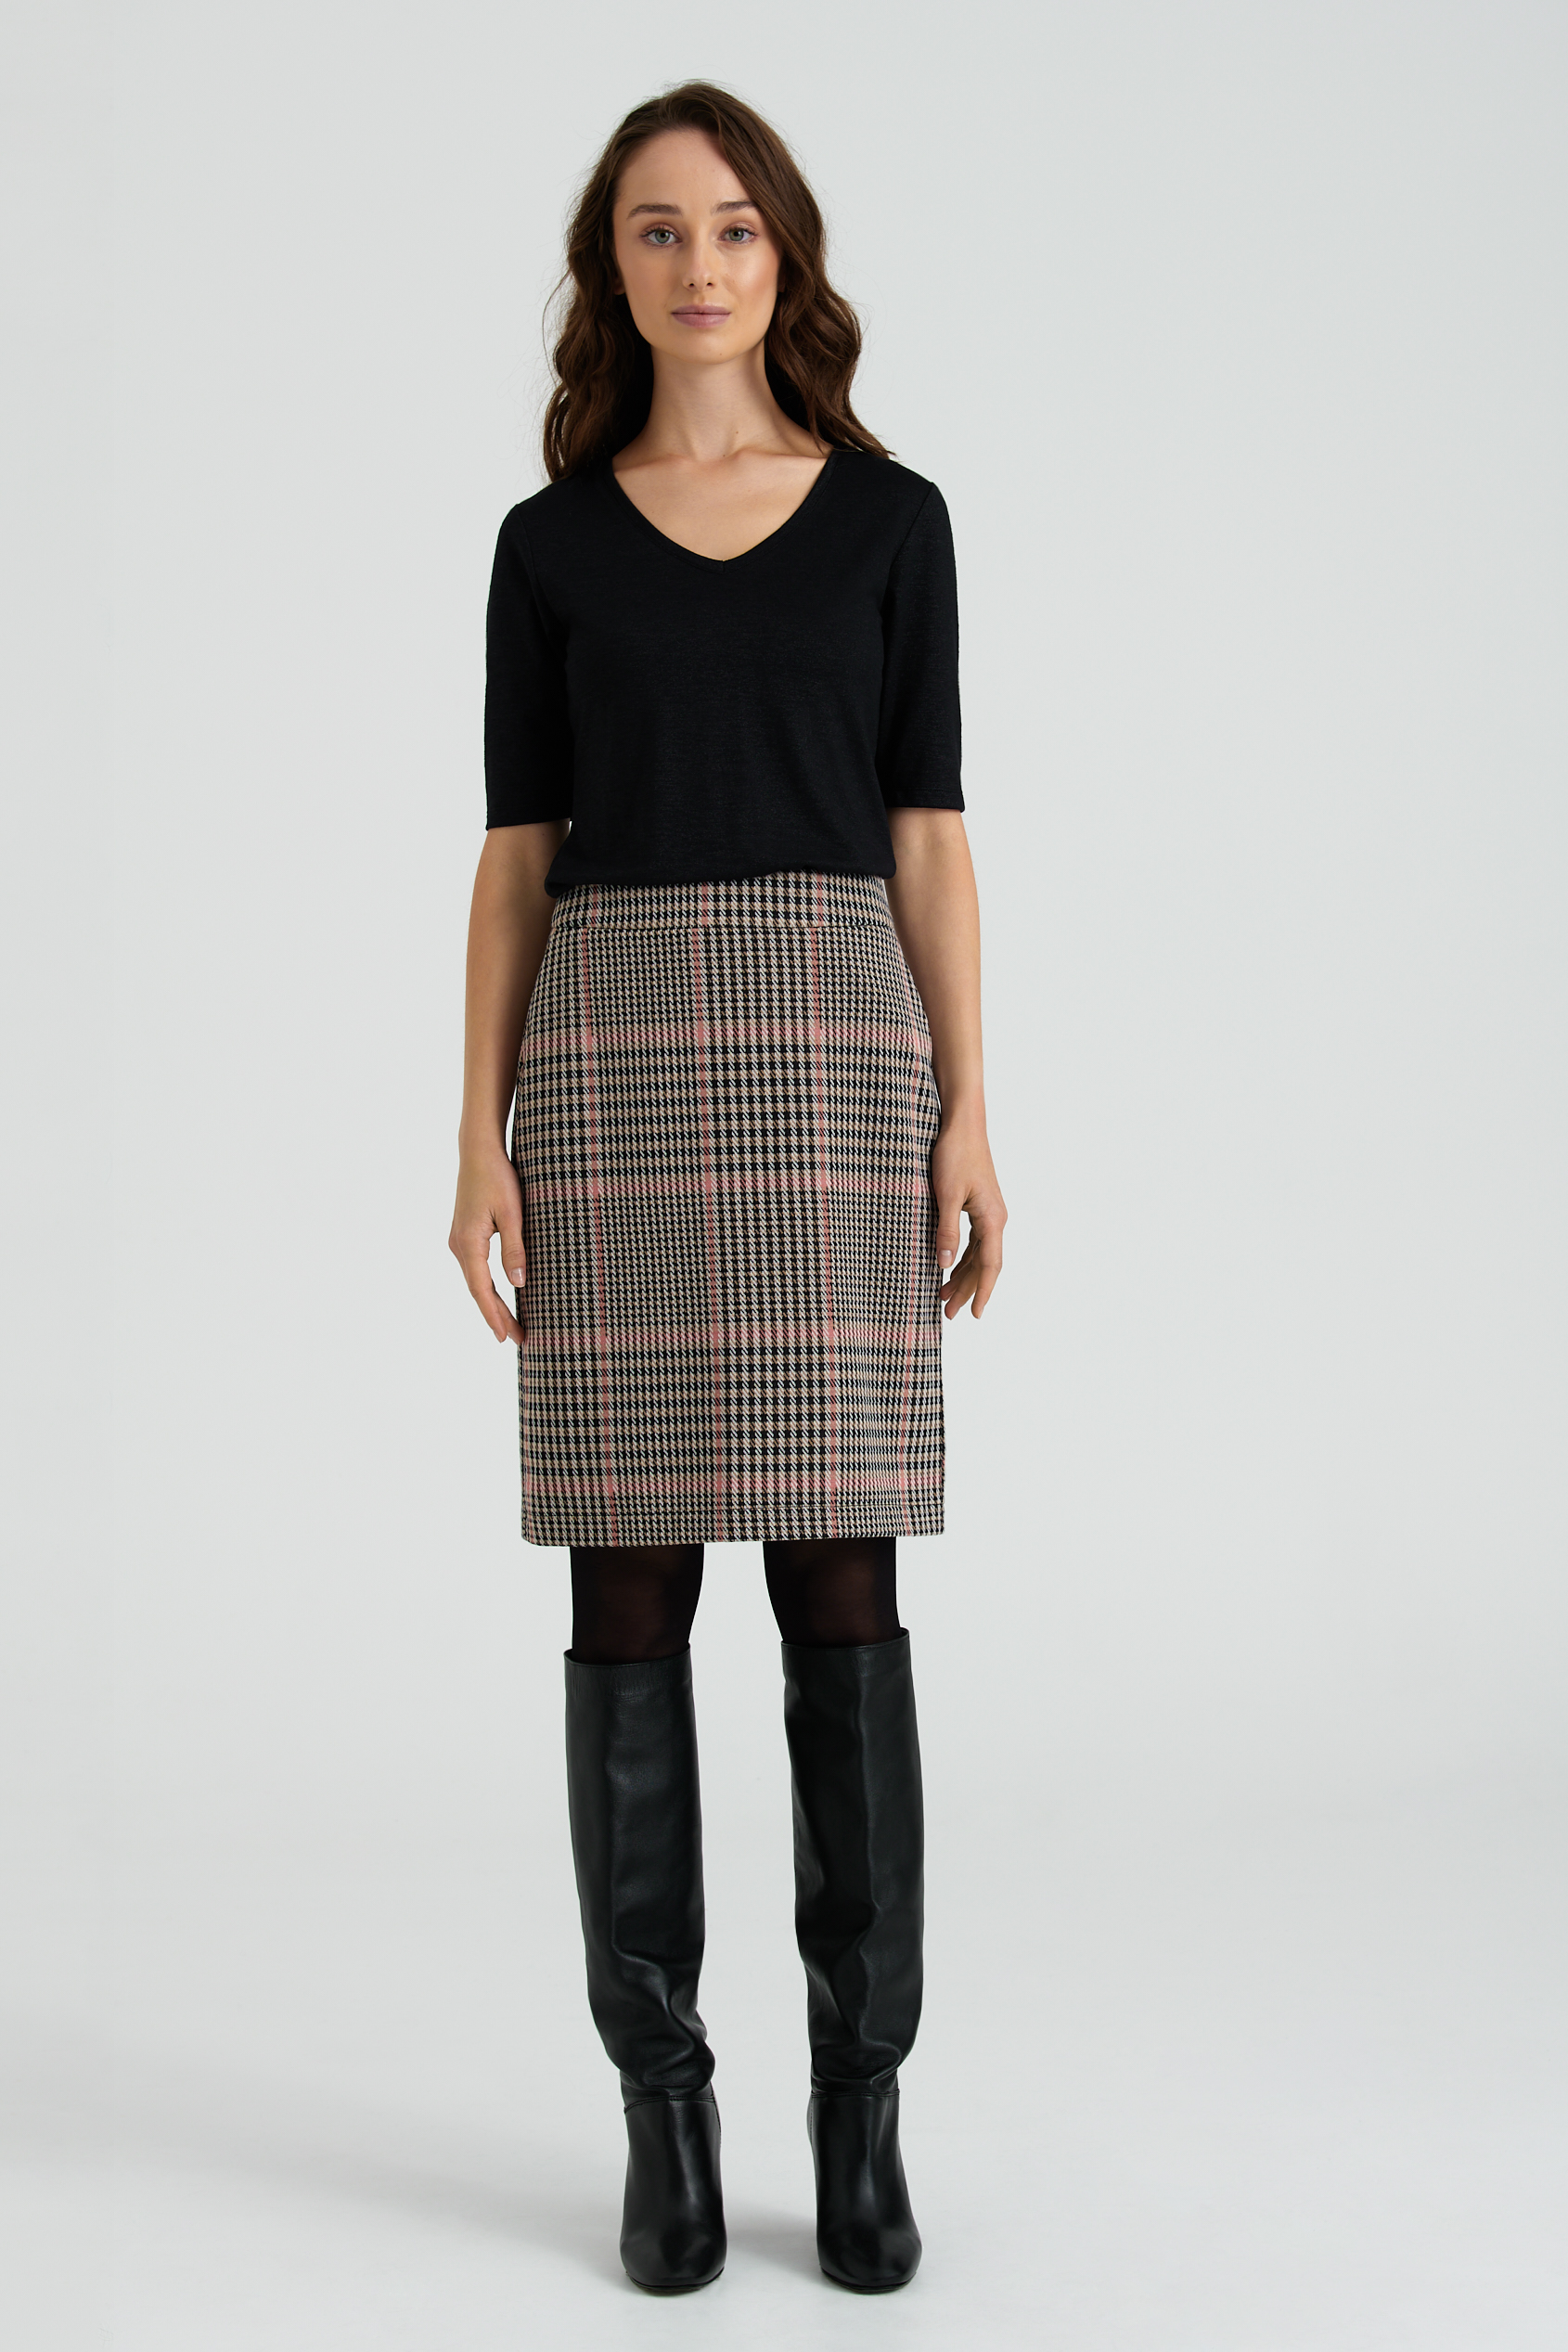 Greenpoint Woman's Skirt SPC310W22CHE16